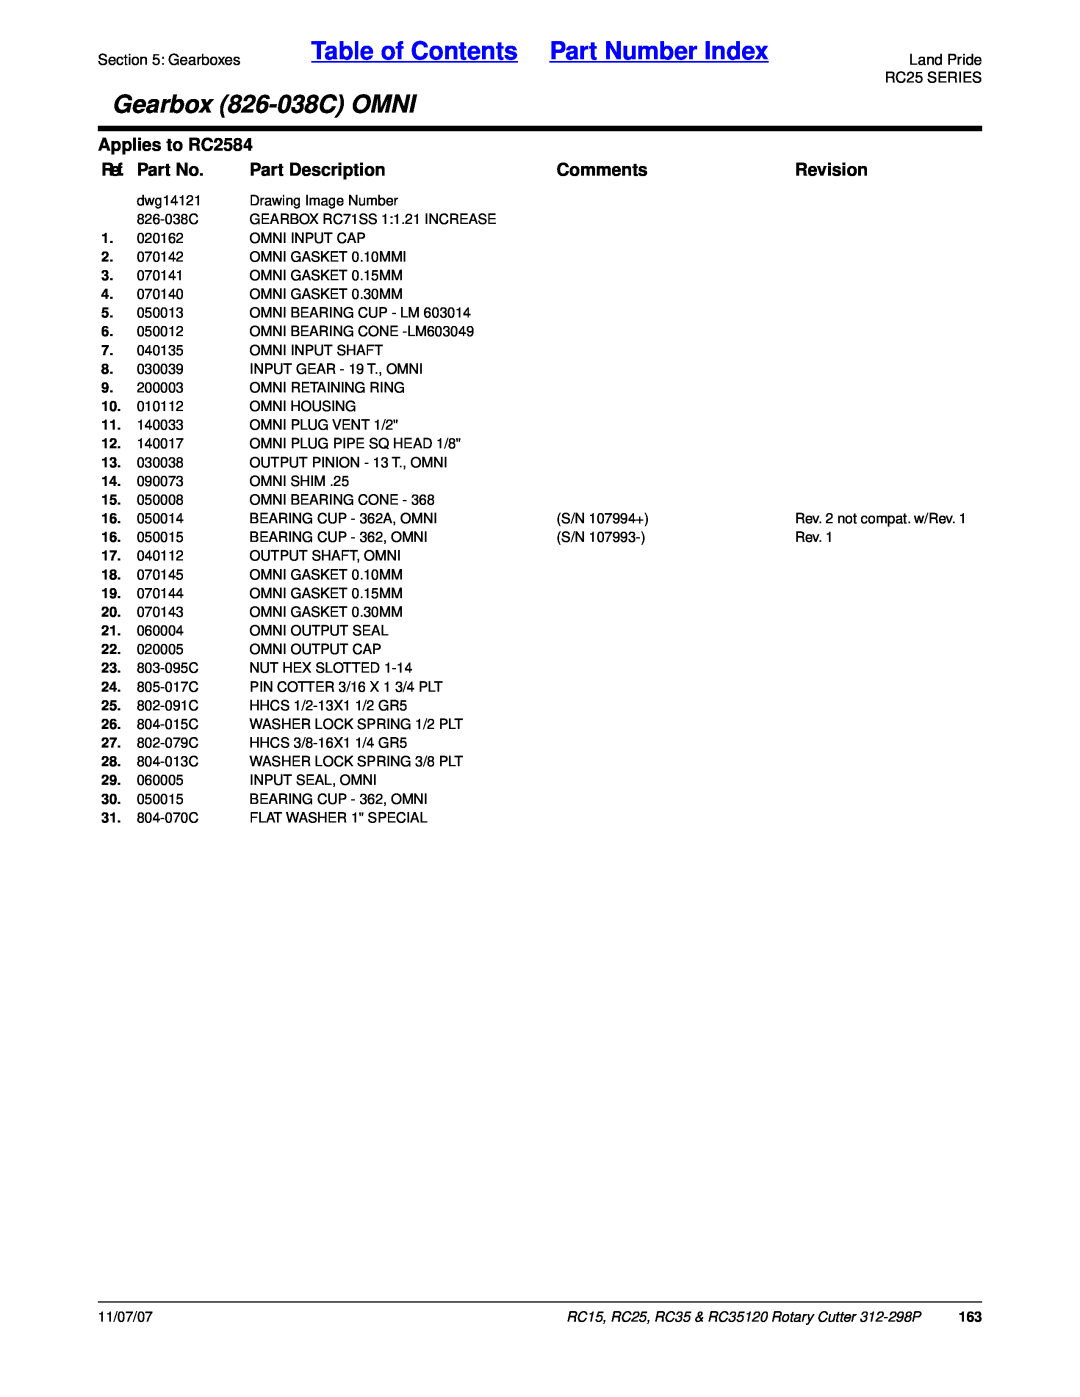 Land Pride RC15, RC35 Table of Contents Part Number Index, Gearbox 826-038COMNI, Applies to RC2584, Ref. Part No, Comments 